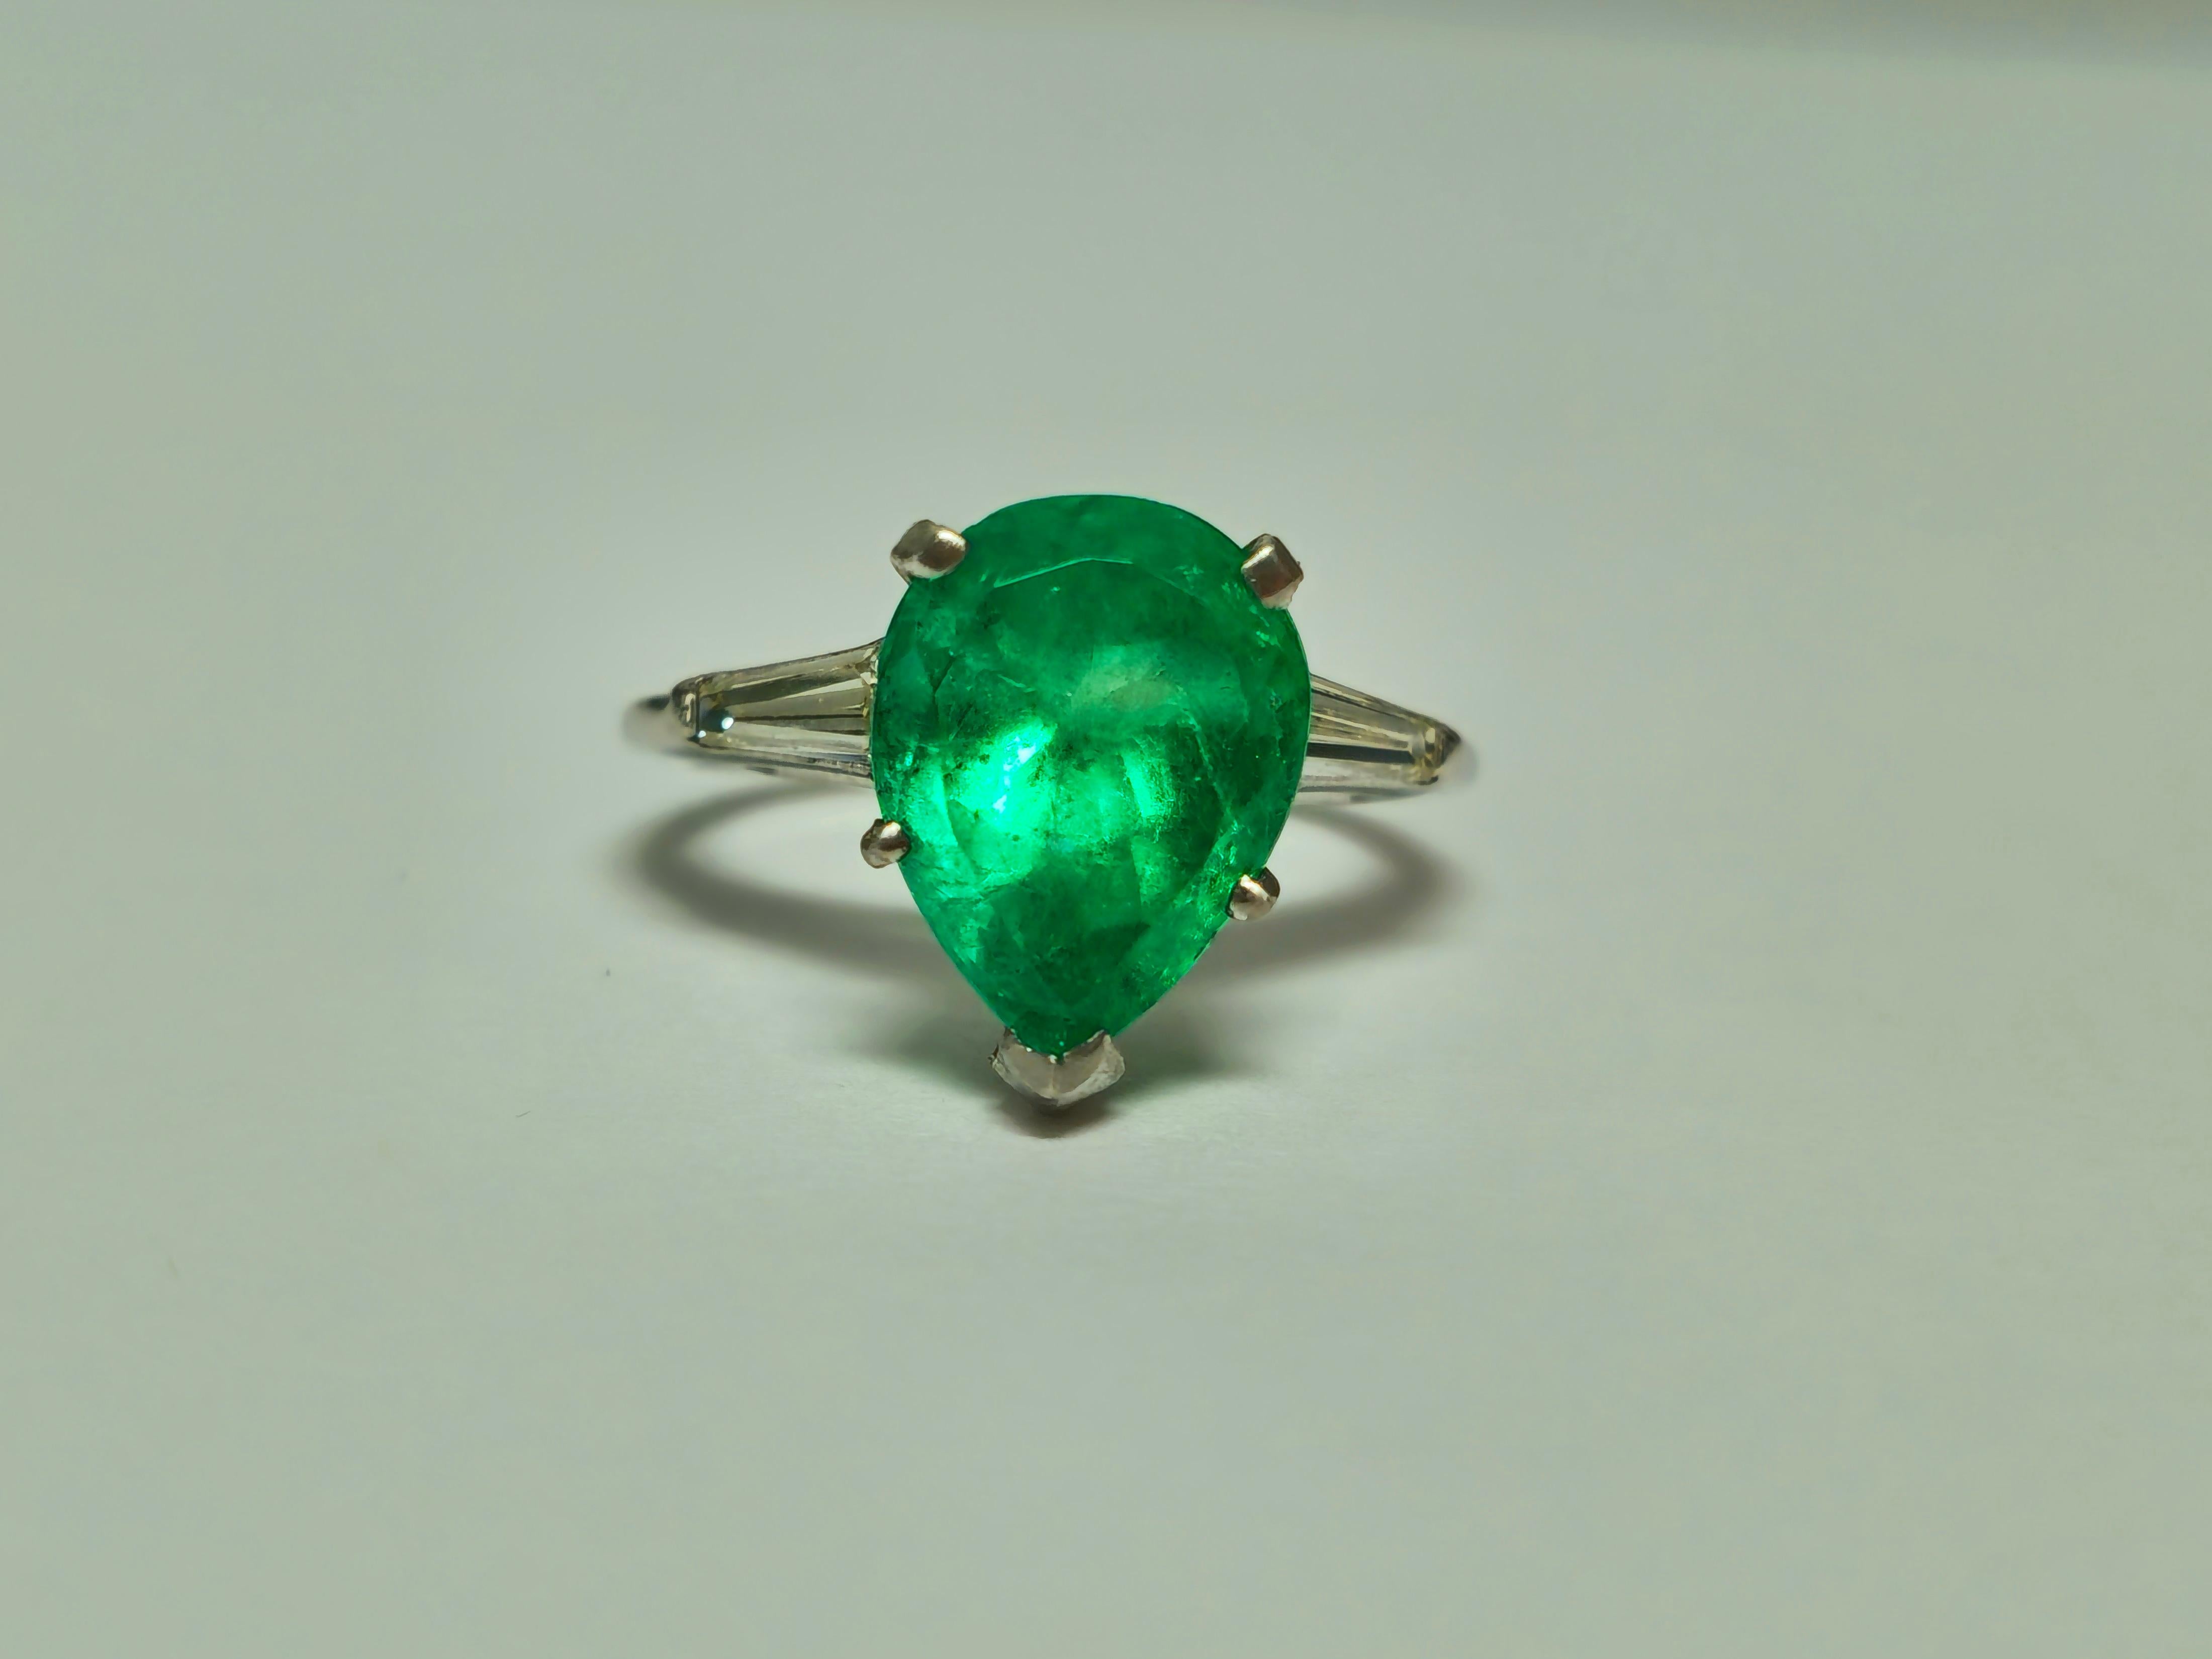 Immerse yourself in timeless luxury with our exquisite Unisex Diamond, Emerald, and Platinum Ring. Crafted from solid platinum, this one-of-a-kind vintage jewelry piece features a stunning 4.50 carat pear-shaped Colombian emerald set in prongs,